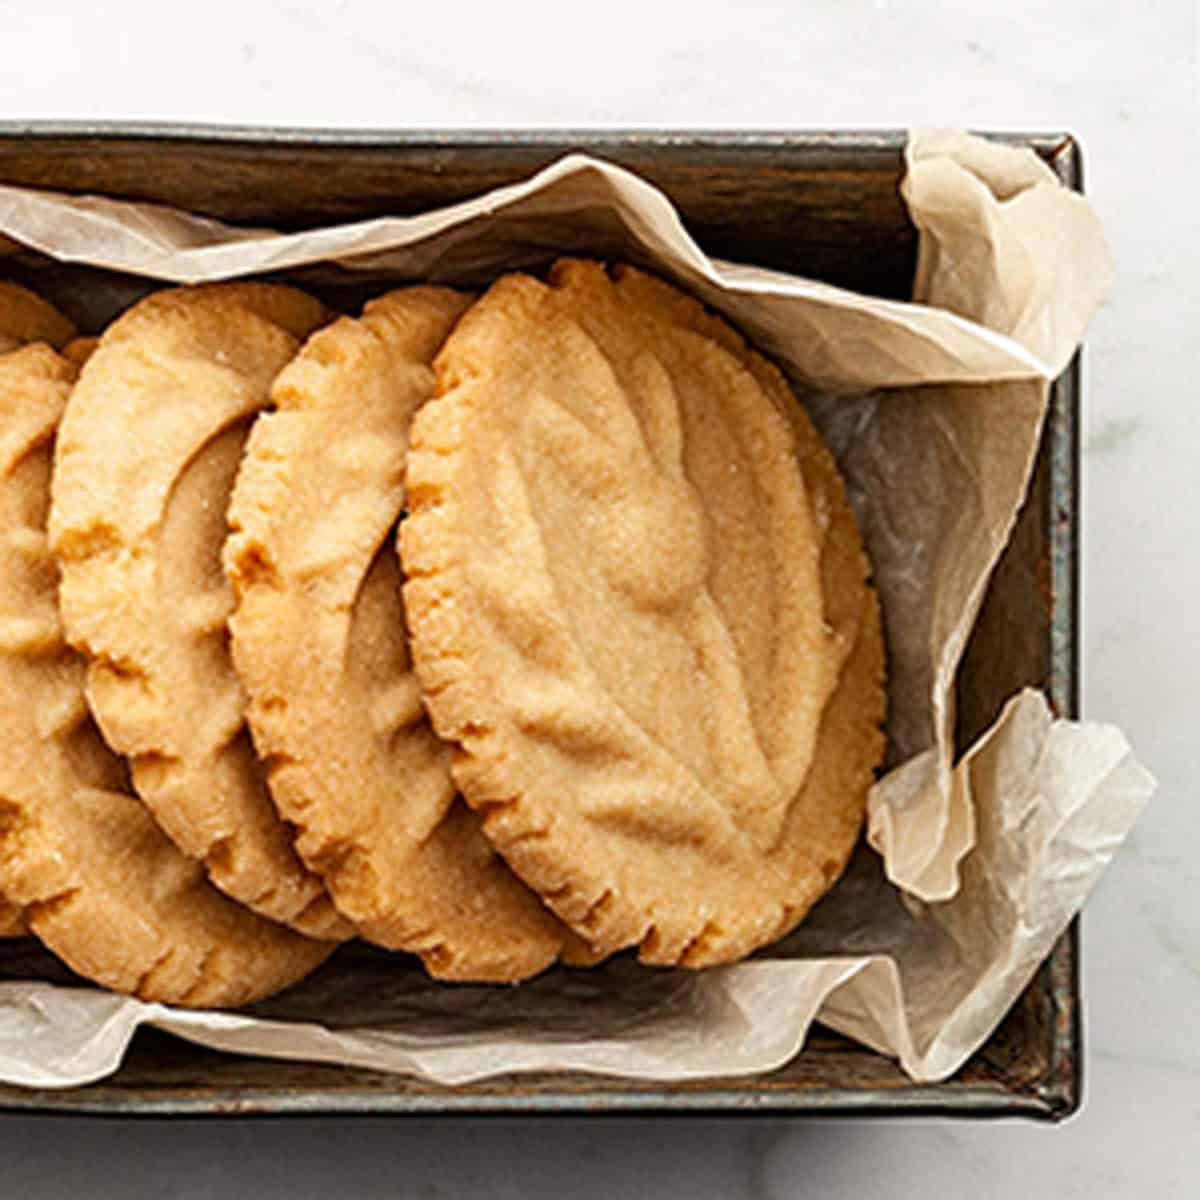 A tin of cookies with paper wrapping.